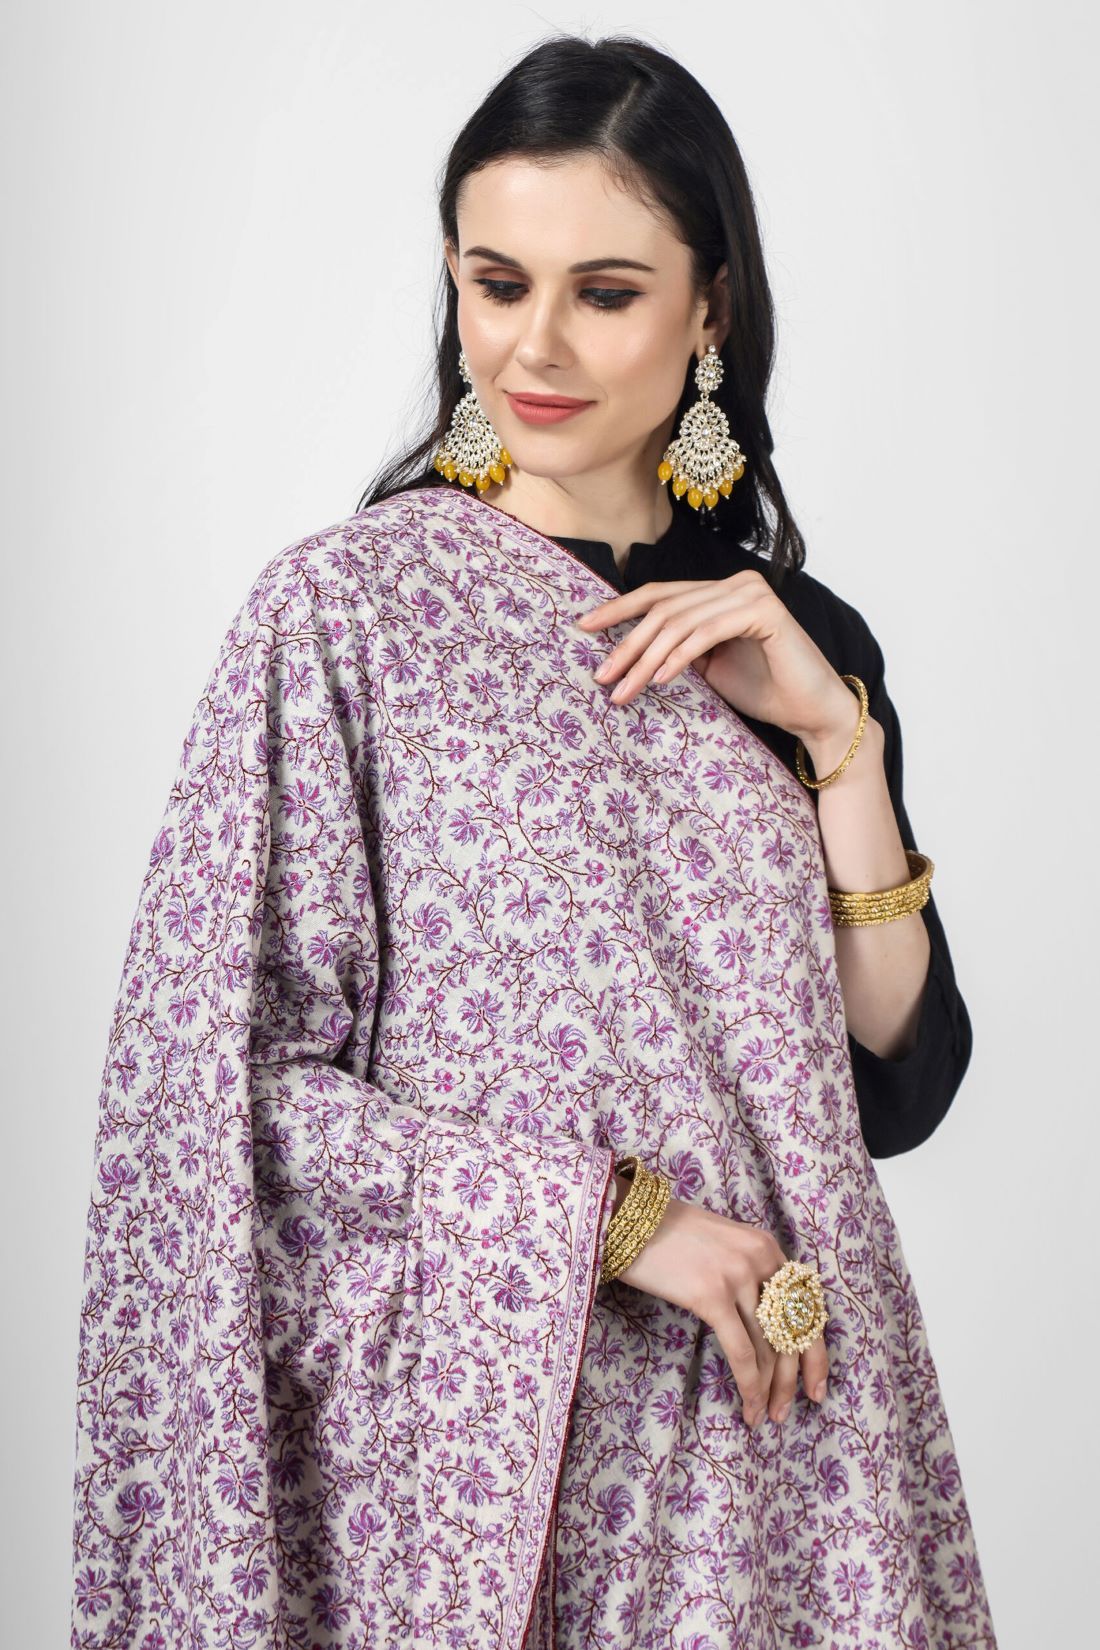 Pashmina shawls - This luxurious White Pashmina Jaldaar With Purple needlework Embroidered Shawl is adorned with intricate needlework embroidery in a stunning Jaldaar pattern, making it an exquisite and glamorous accessory for any occasion. The premium quality Pashmina wool adds warmth and comfort to the shawl.